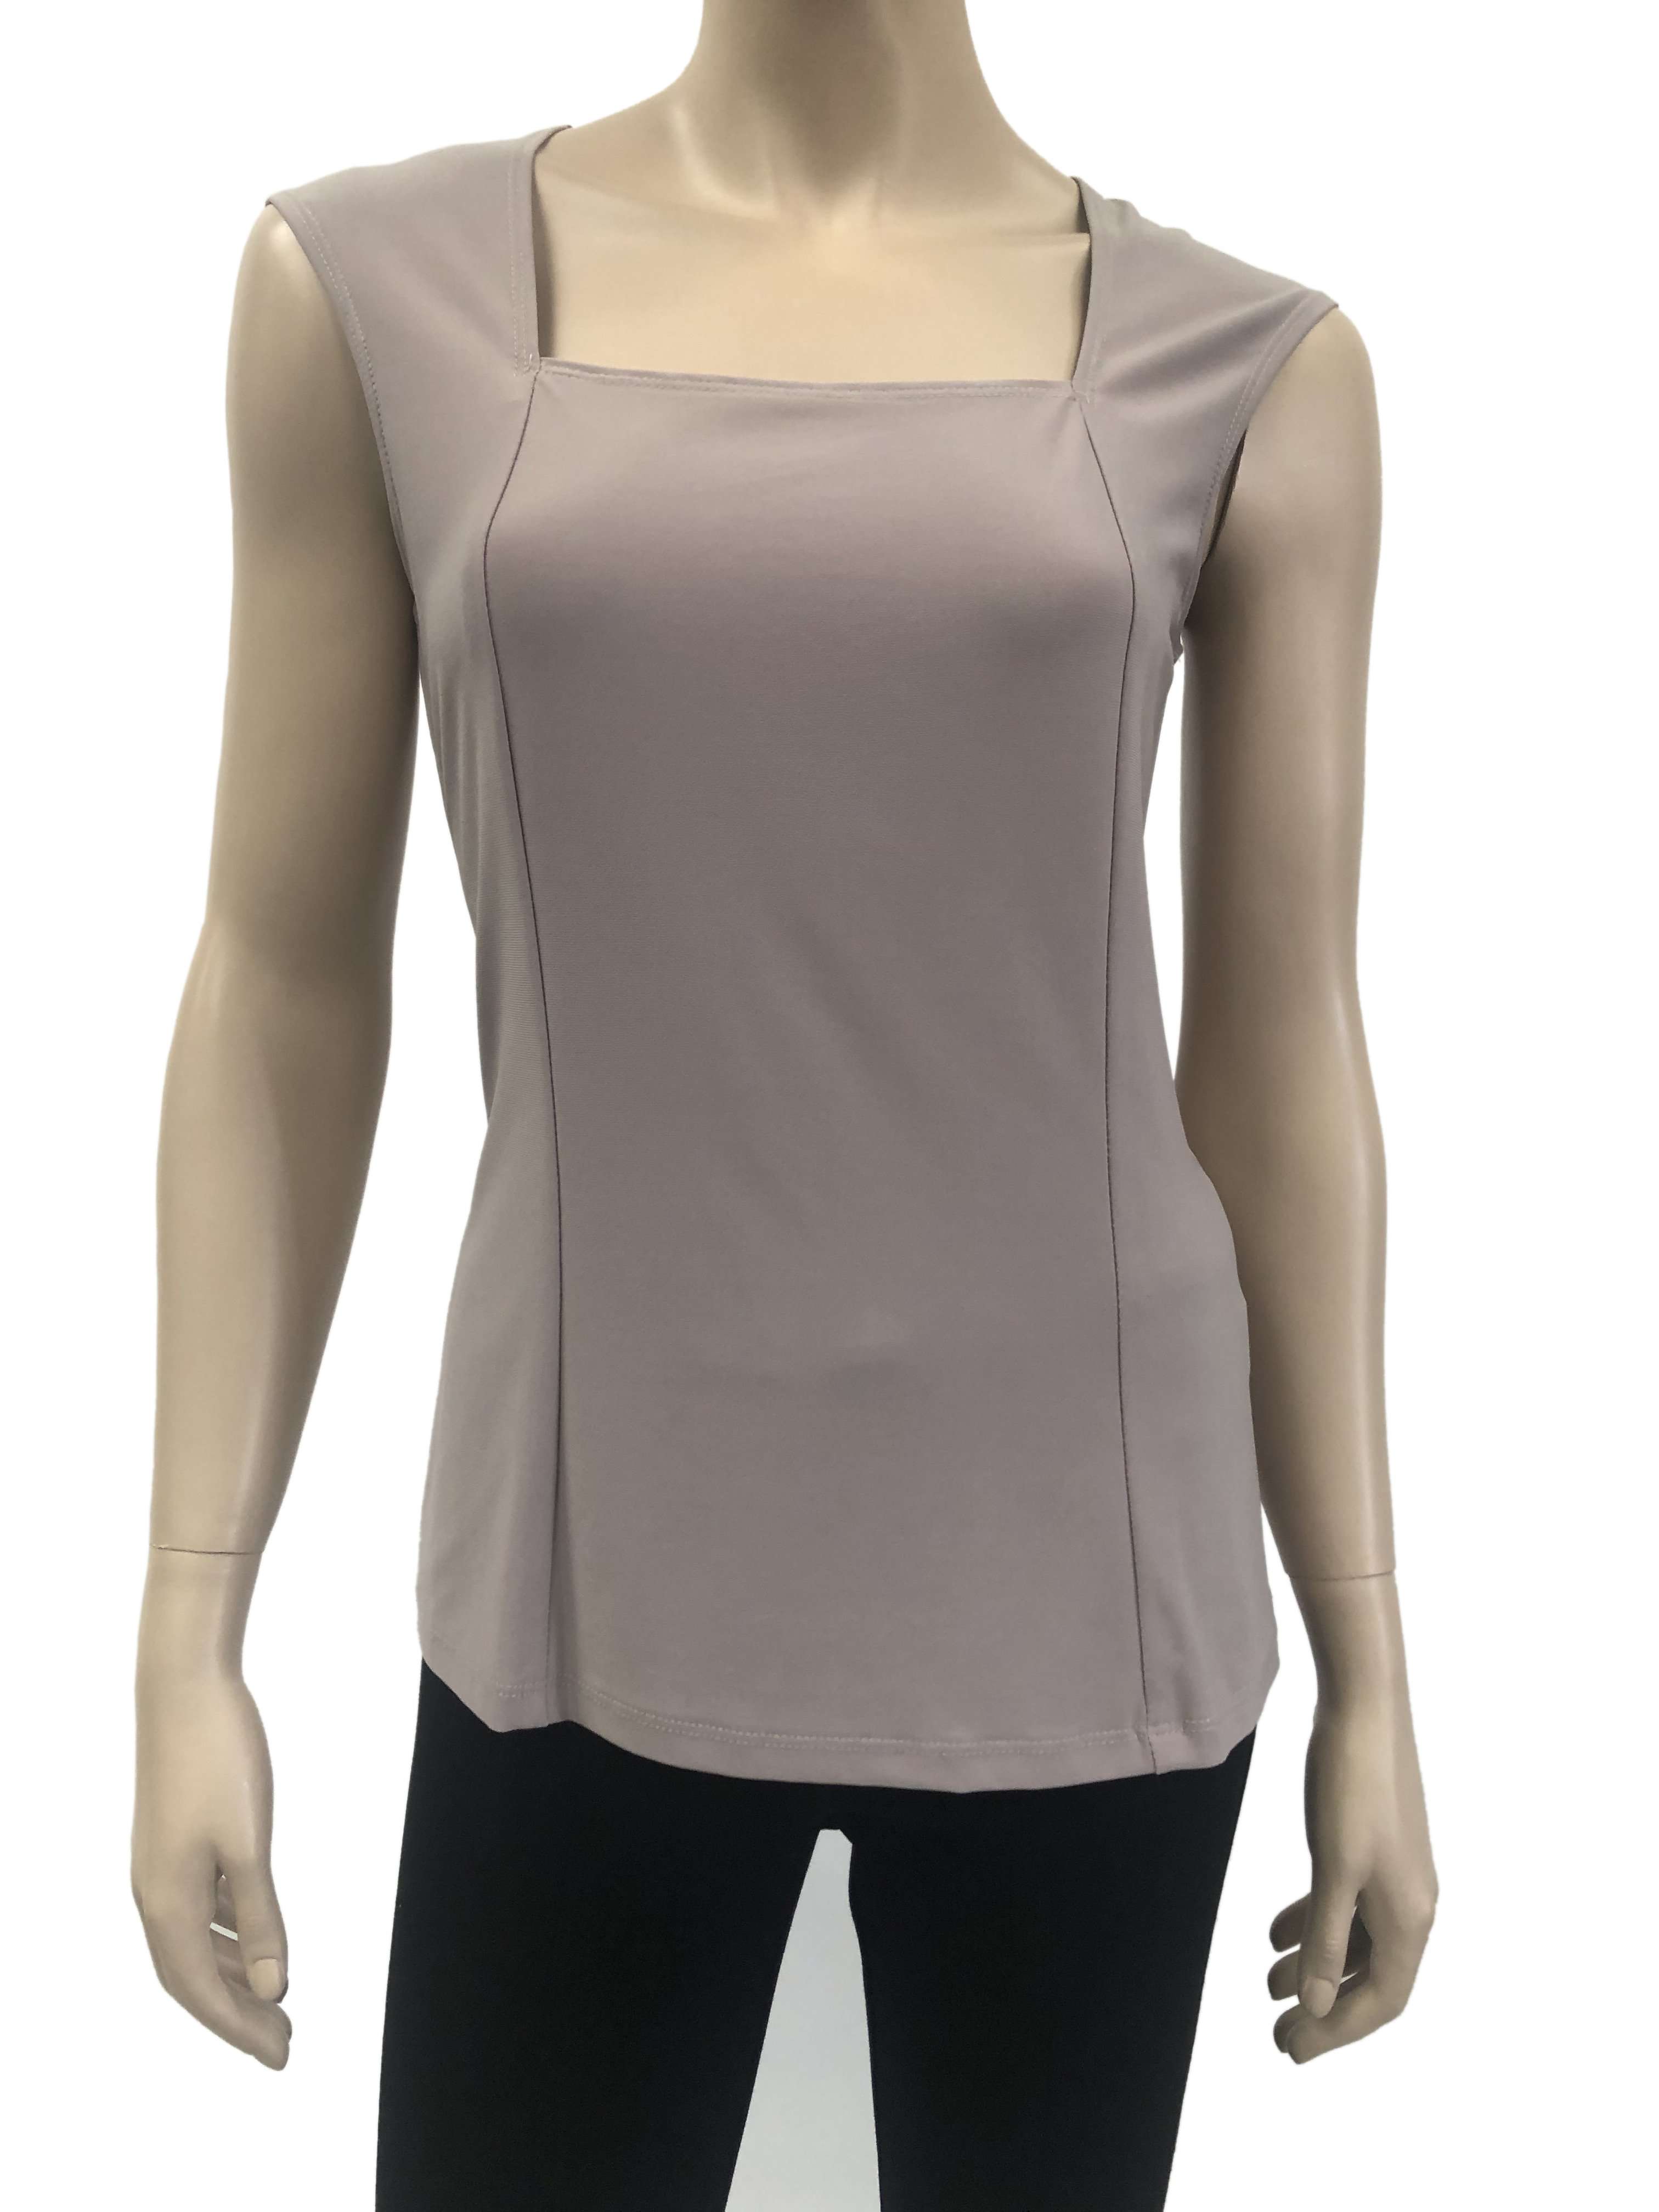 Women's Camisole Stone Beige Square Neckline Quality Stretch Fabric Made in Canada - Yvonne Marie - Yvonne Marie